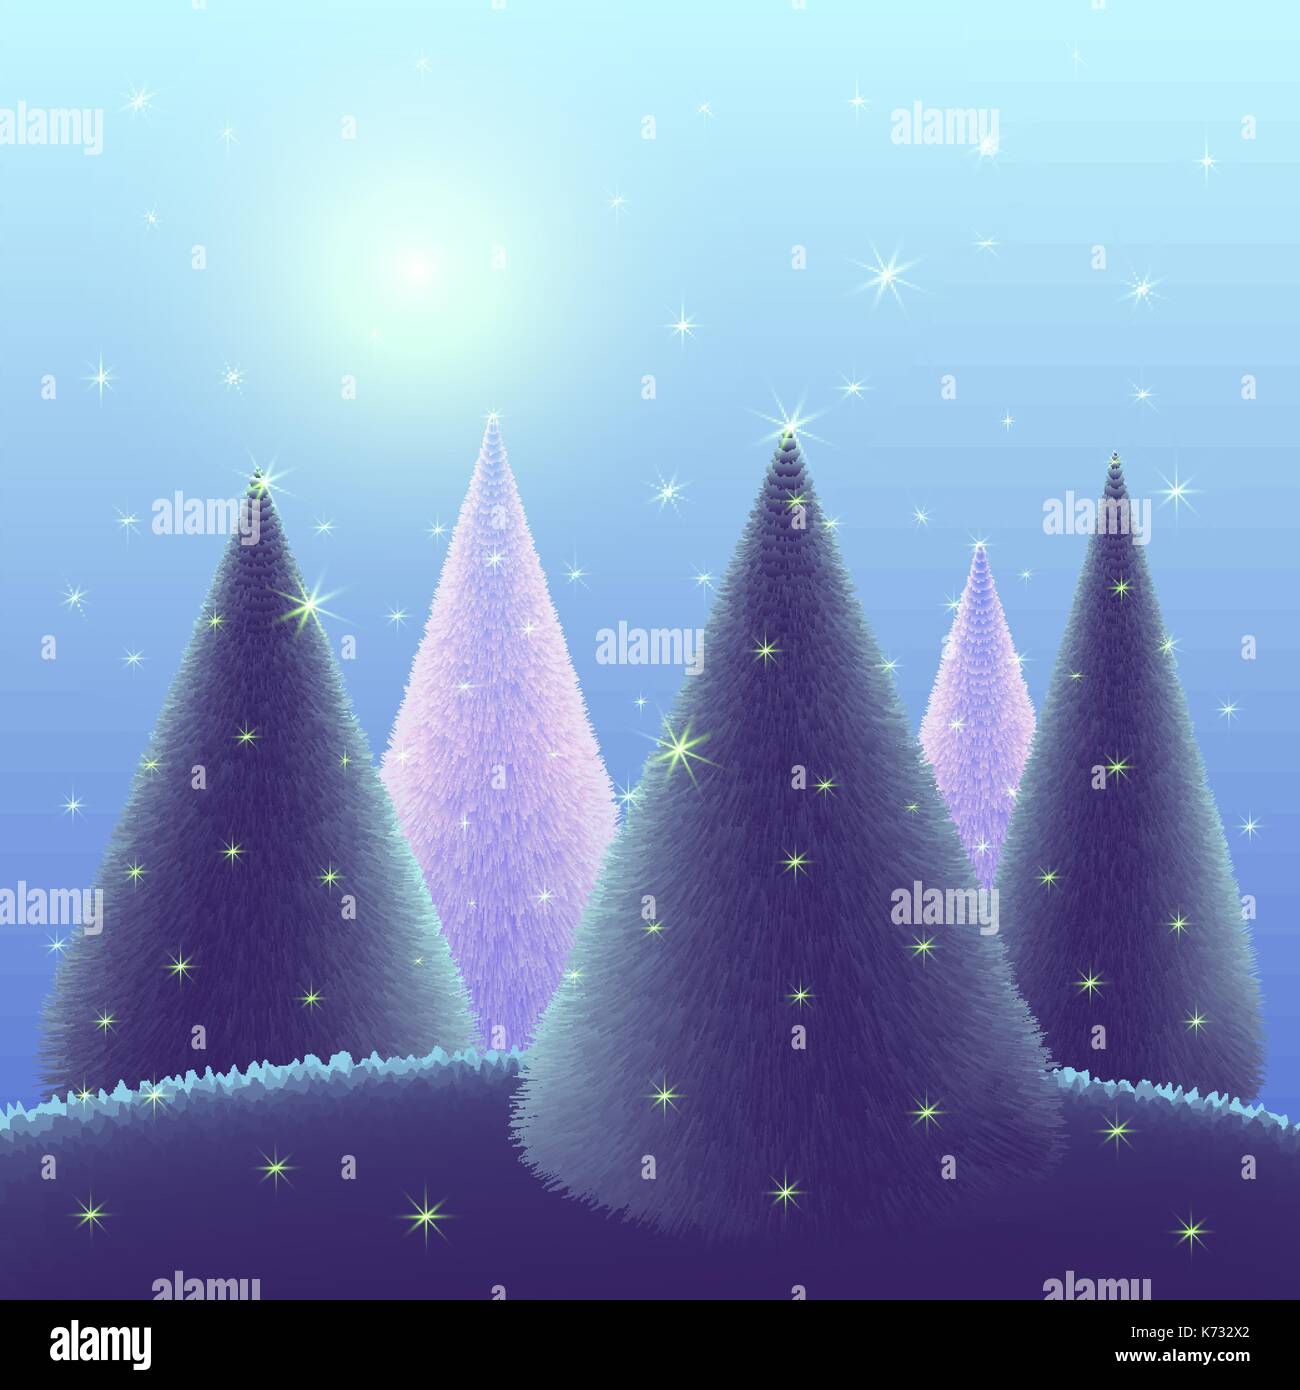 Greeting  background Merry Christmas Stock Vector